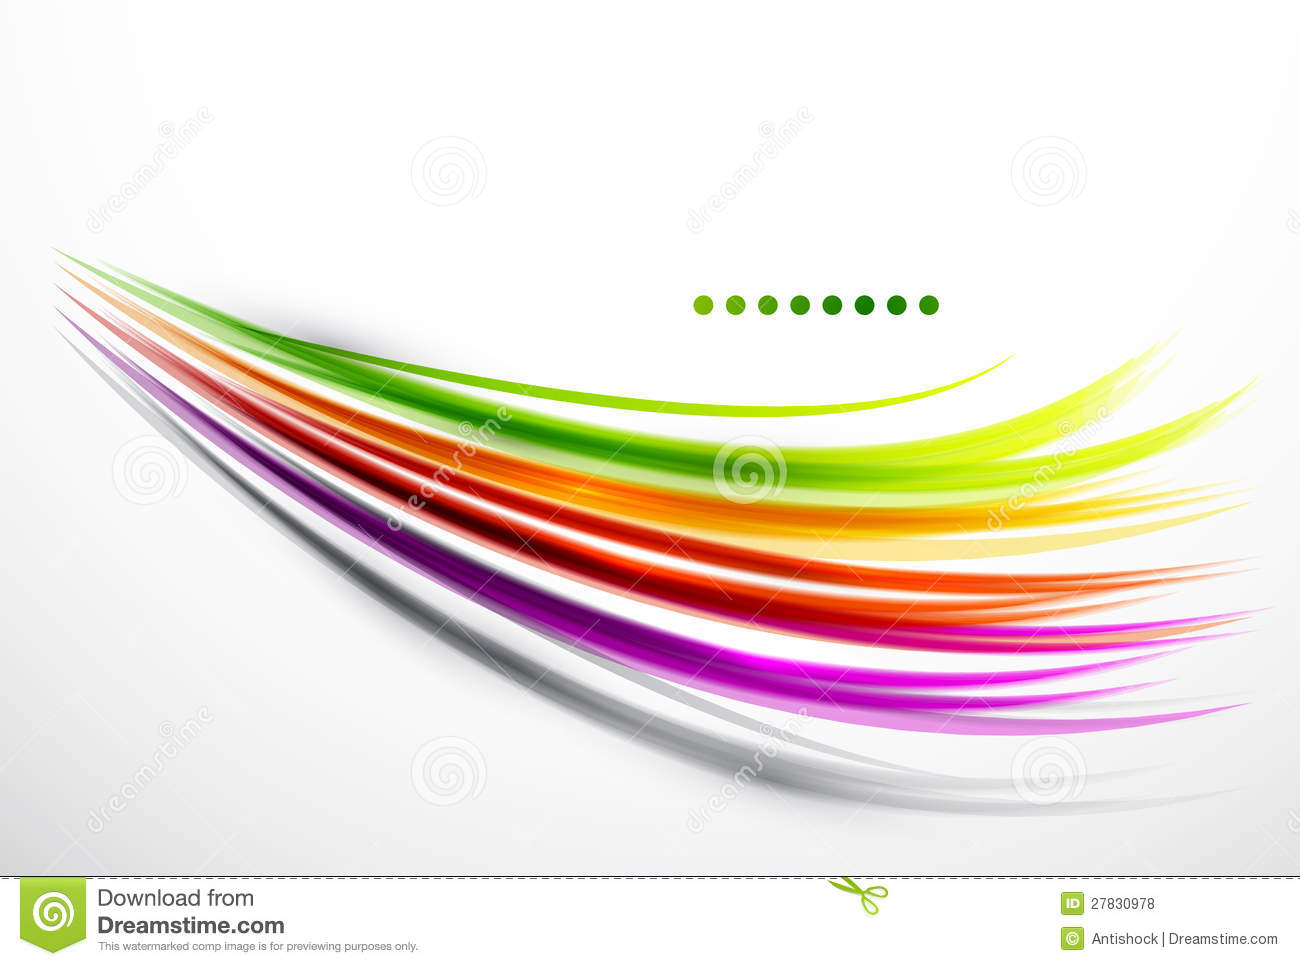 Colorful Wavy Lines Royalty Free Stock Photos   Image  27830978